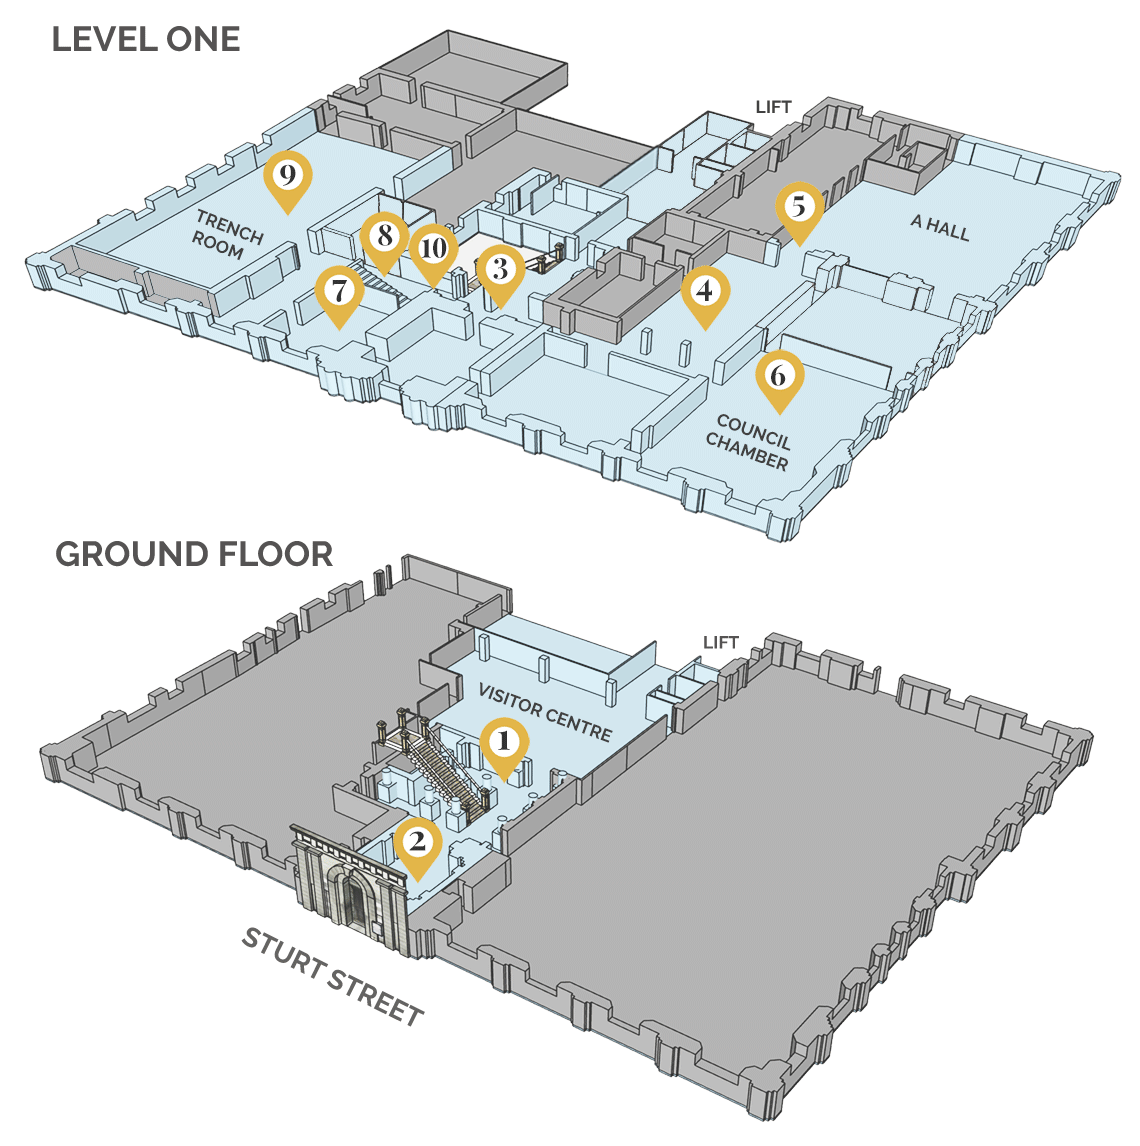 Plan of Town Hall showing audio tour stops